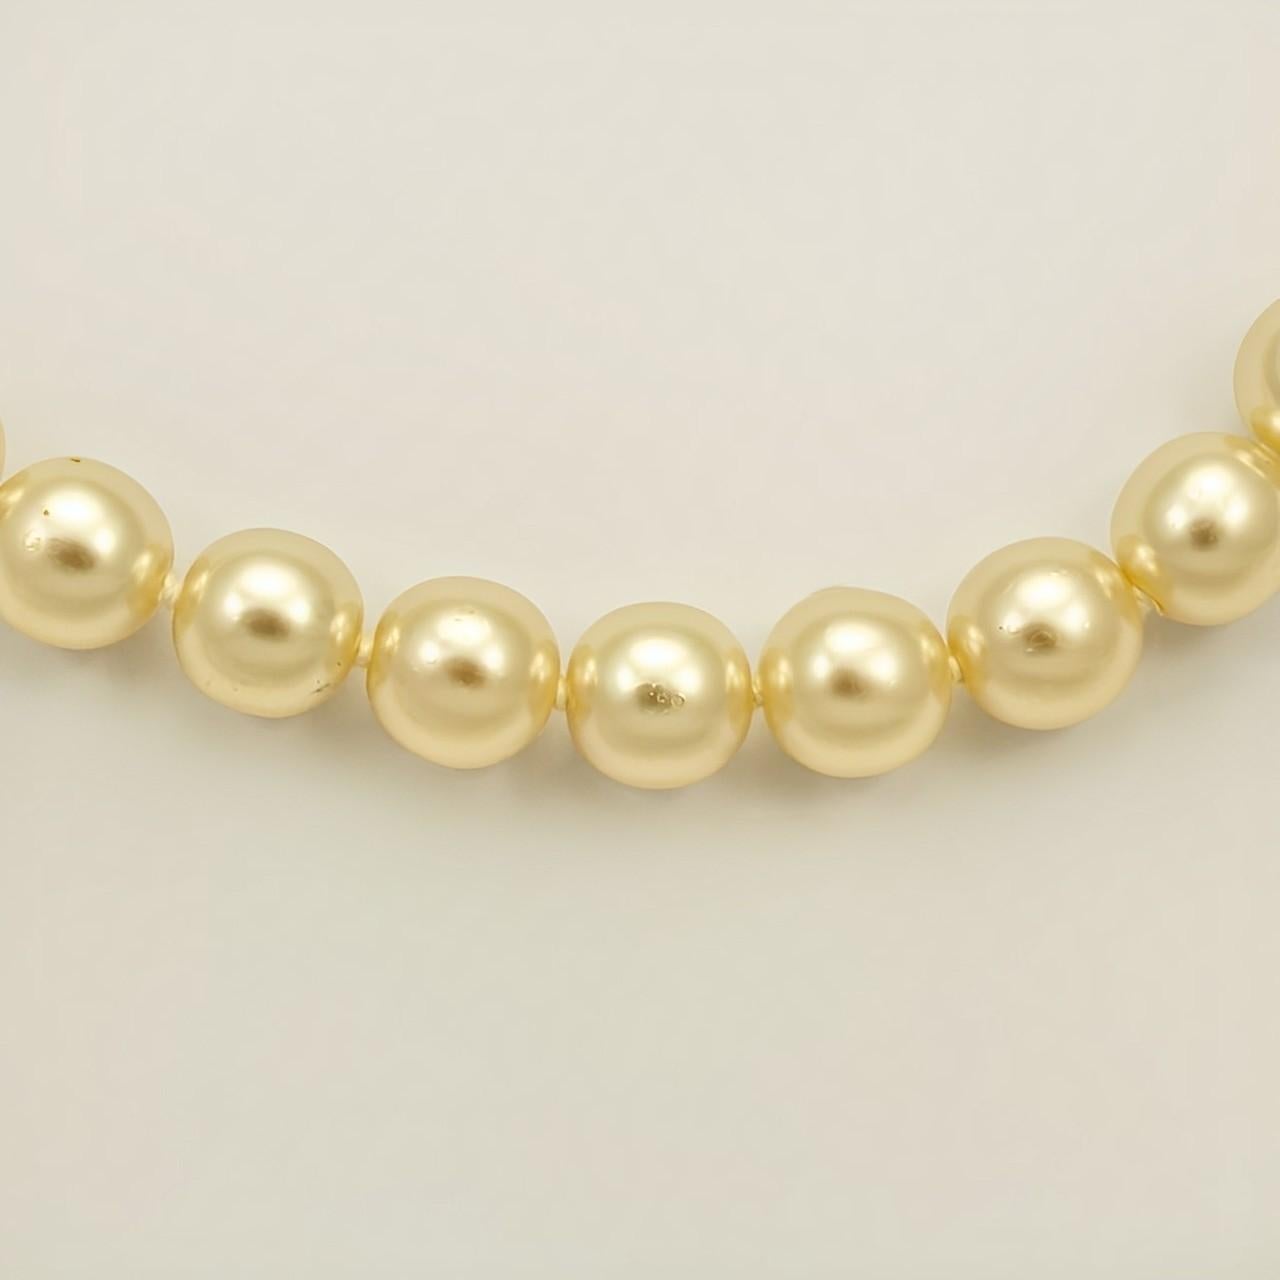 Beautiful cream glass pearl necklace featuring a round gold plated ridged design clasp set with three pearls. The lustrous pearls are knotted between each pearl. Measuring length 43.5 cm / 17.1 inches. The pearls are 9 mm / .35 inch. The necklace is